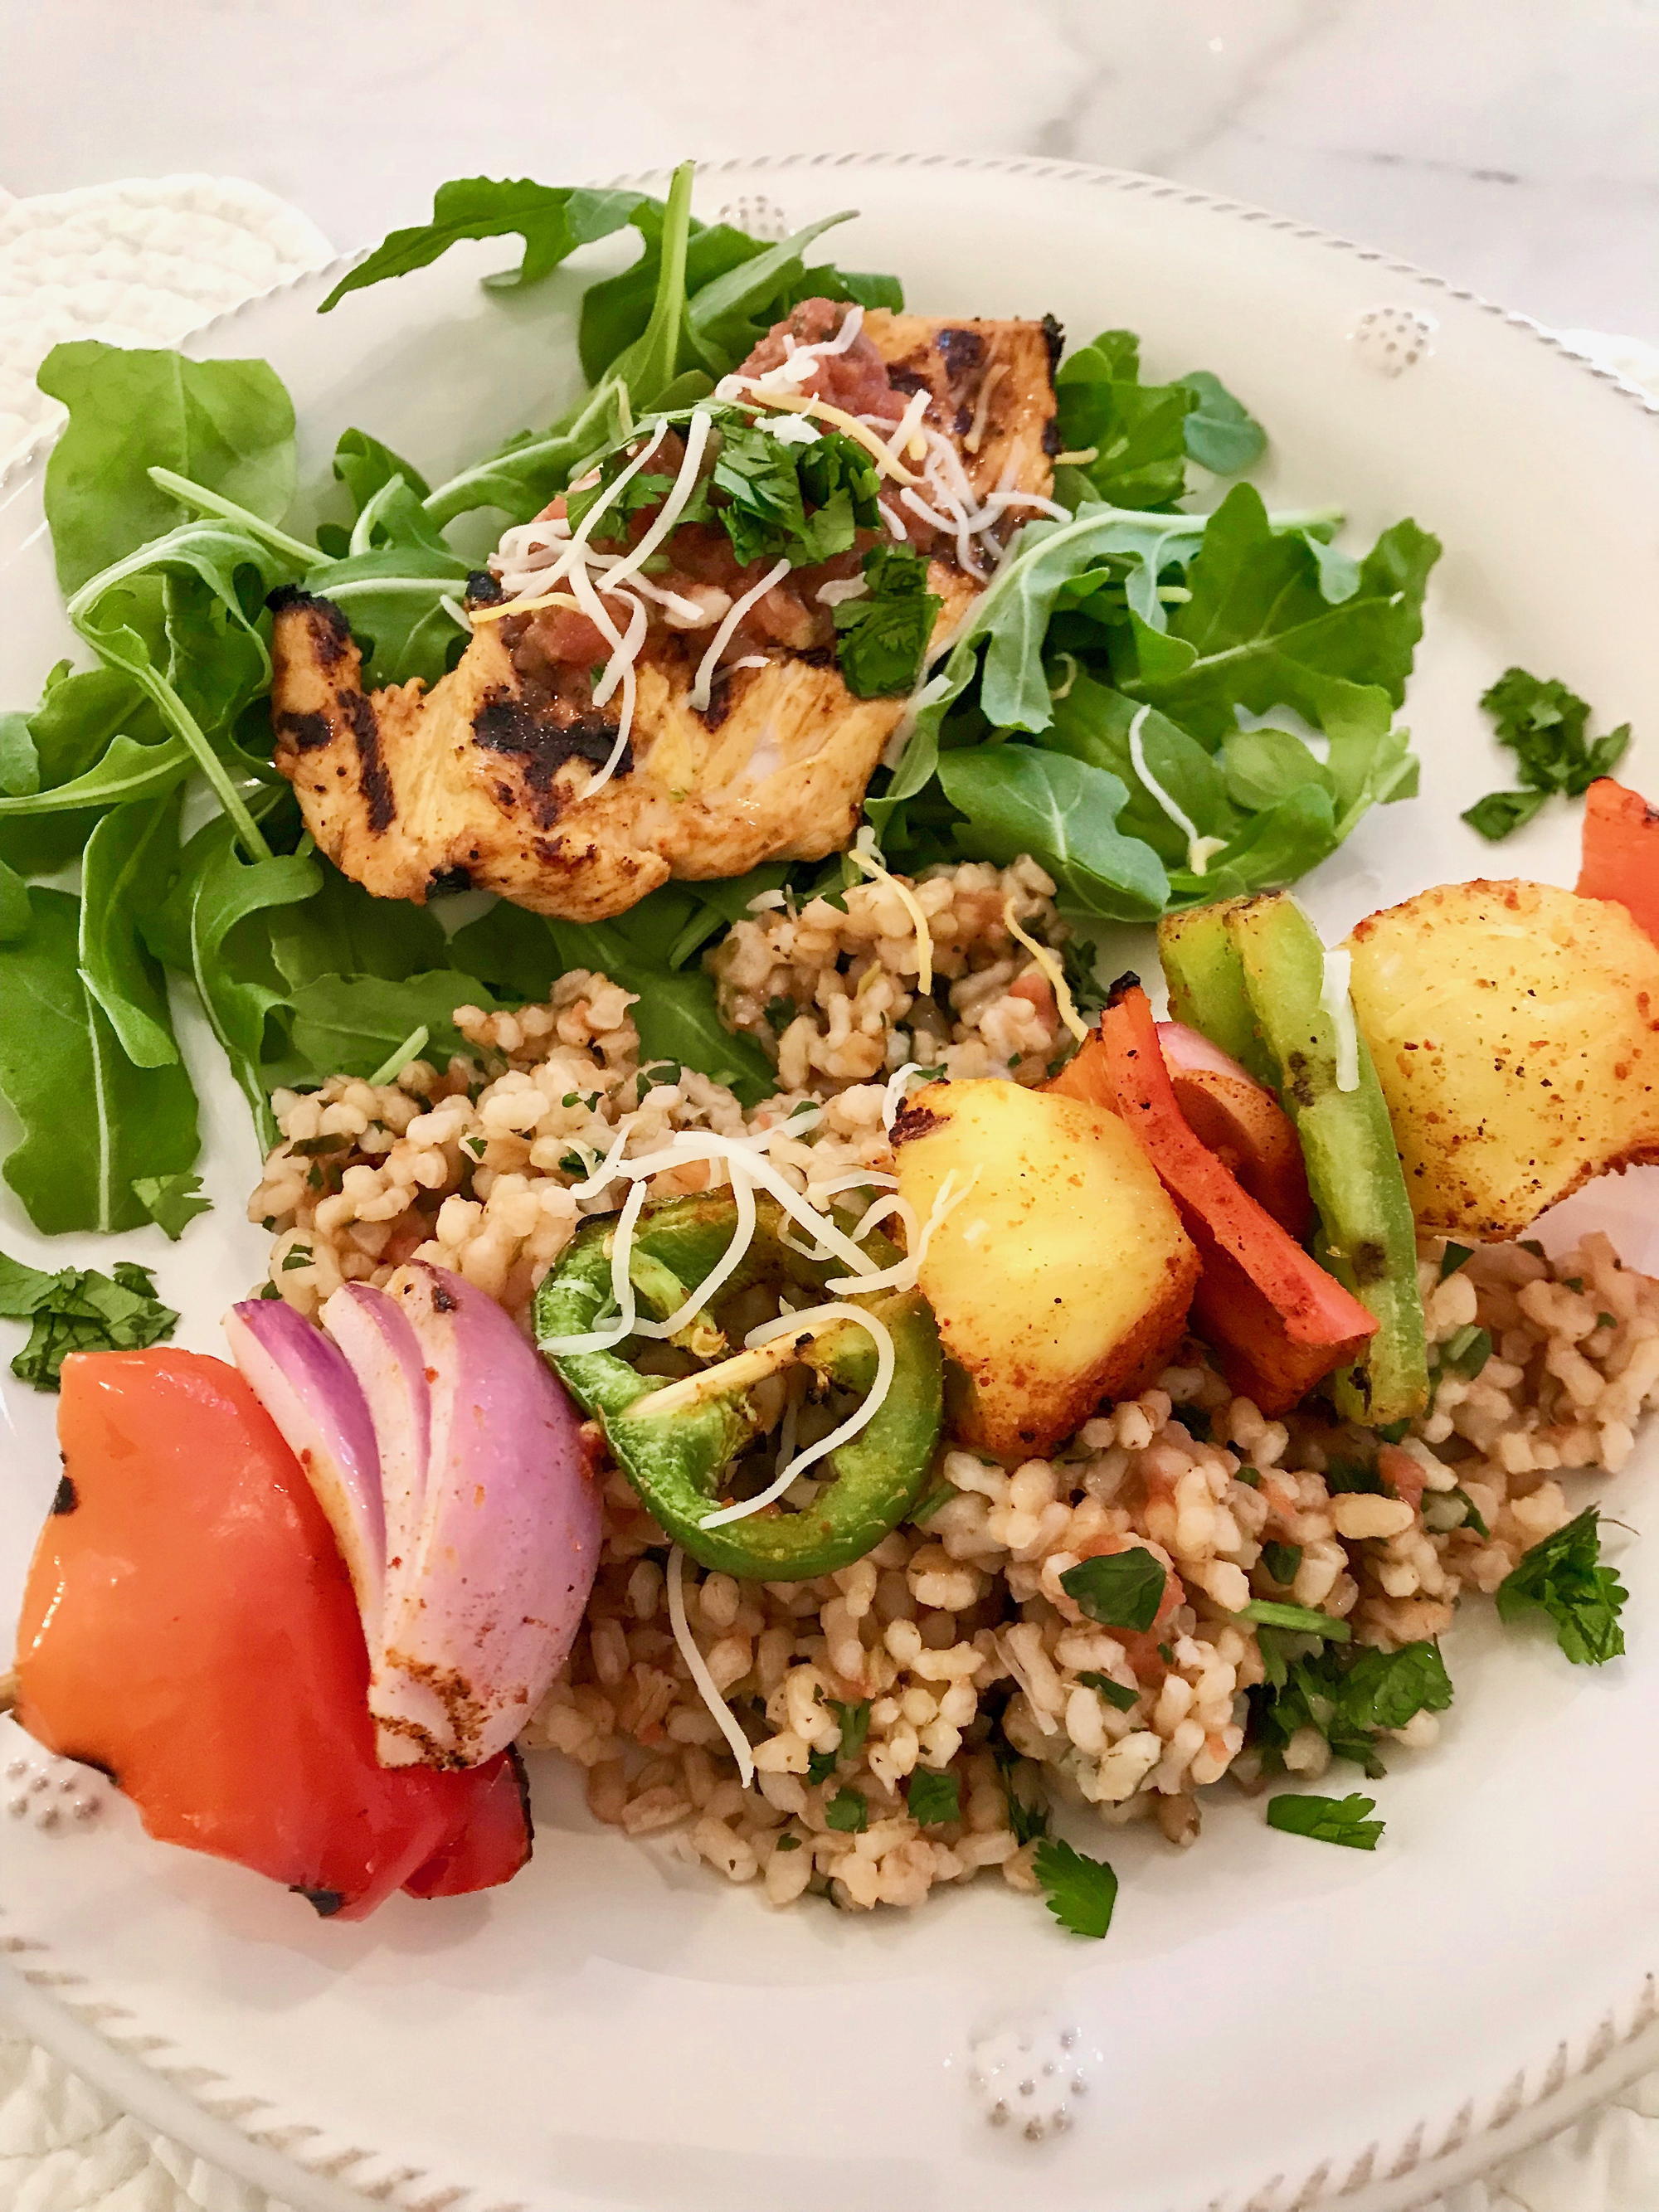 Grilled Chicken Plate, Veggie Skewers and Spanish Rice Recipe